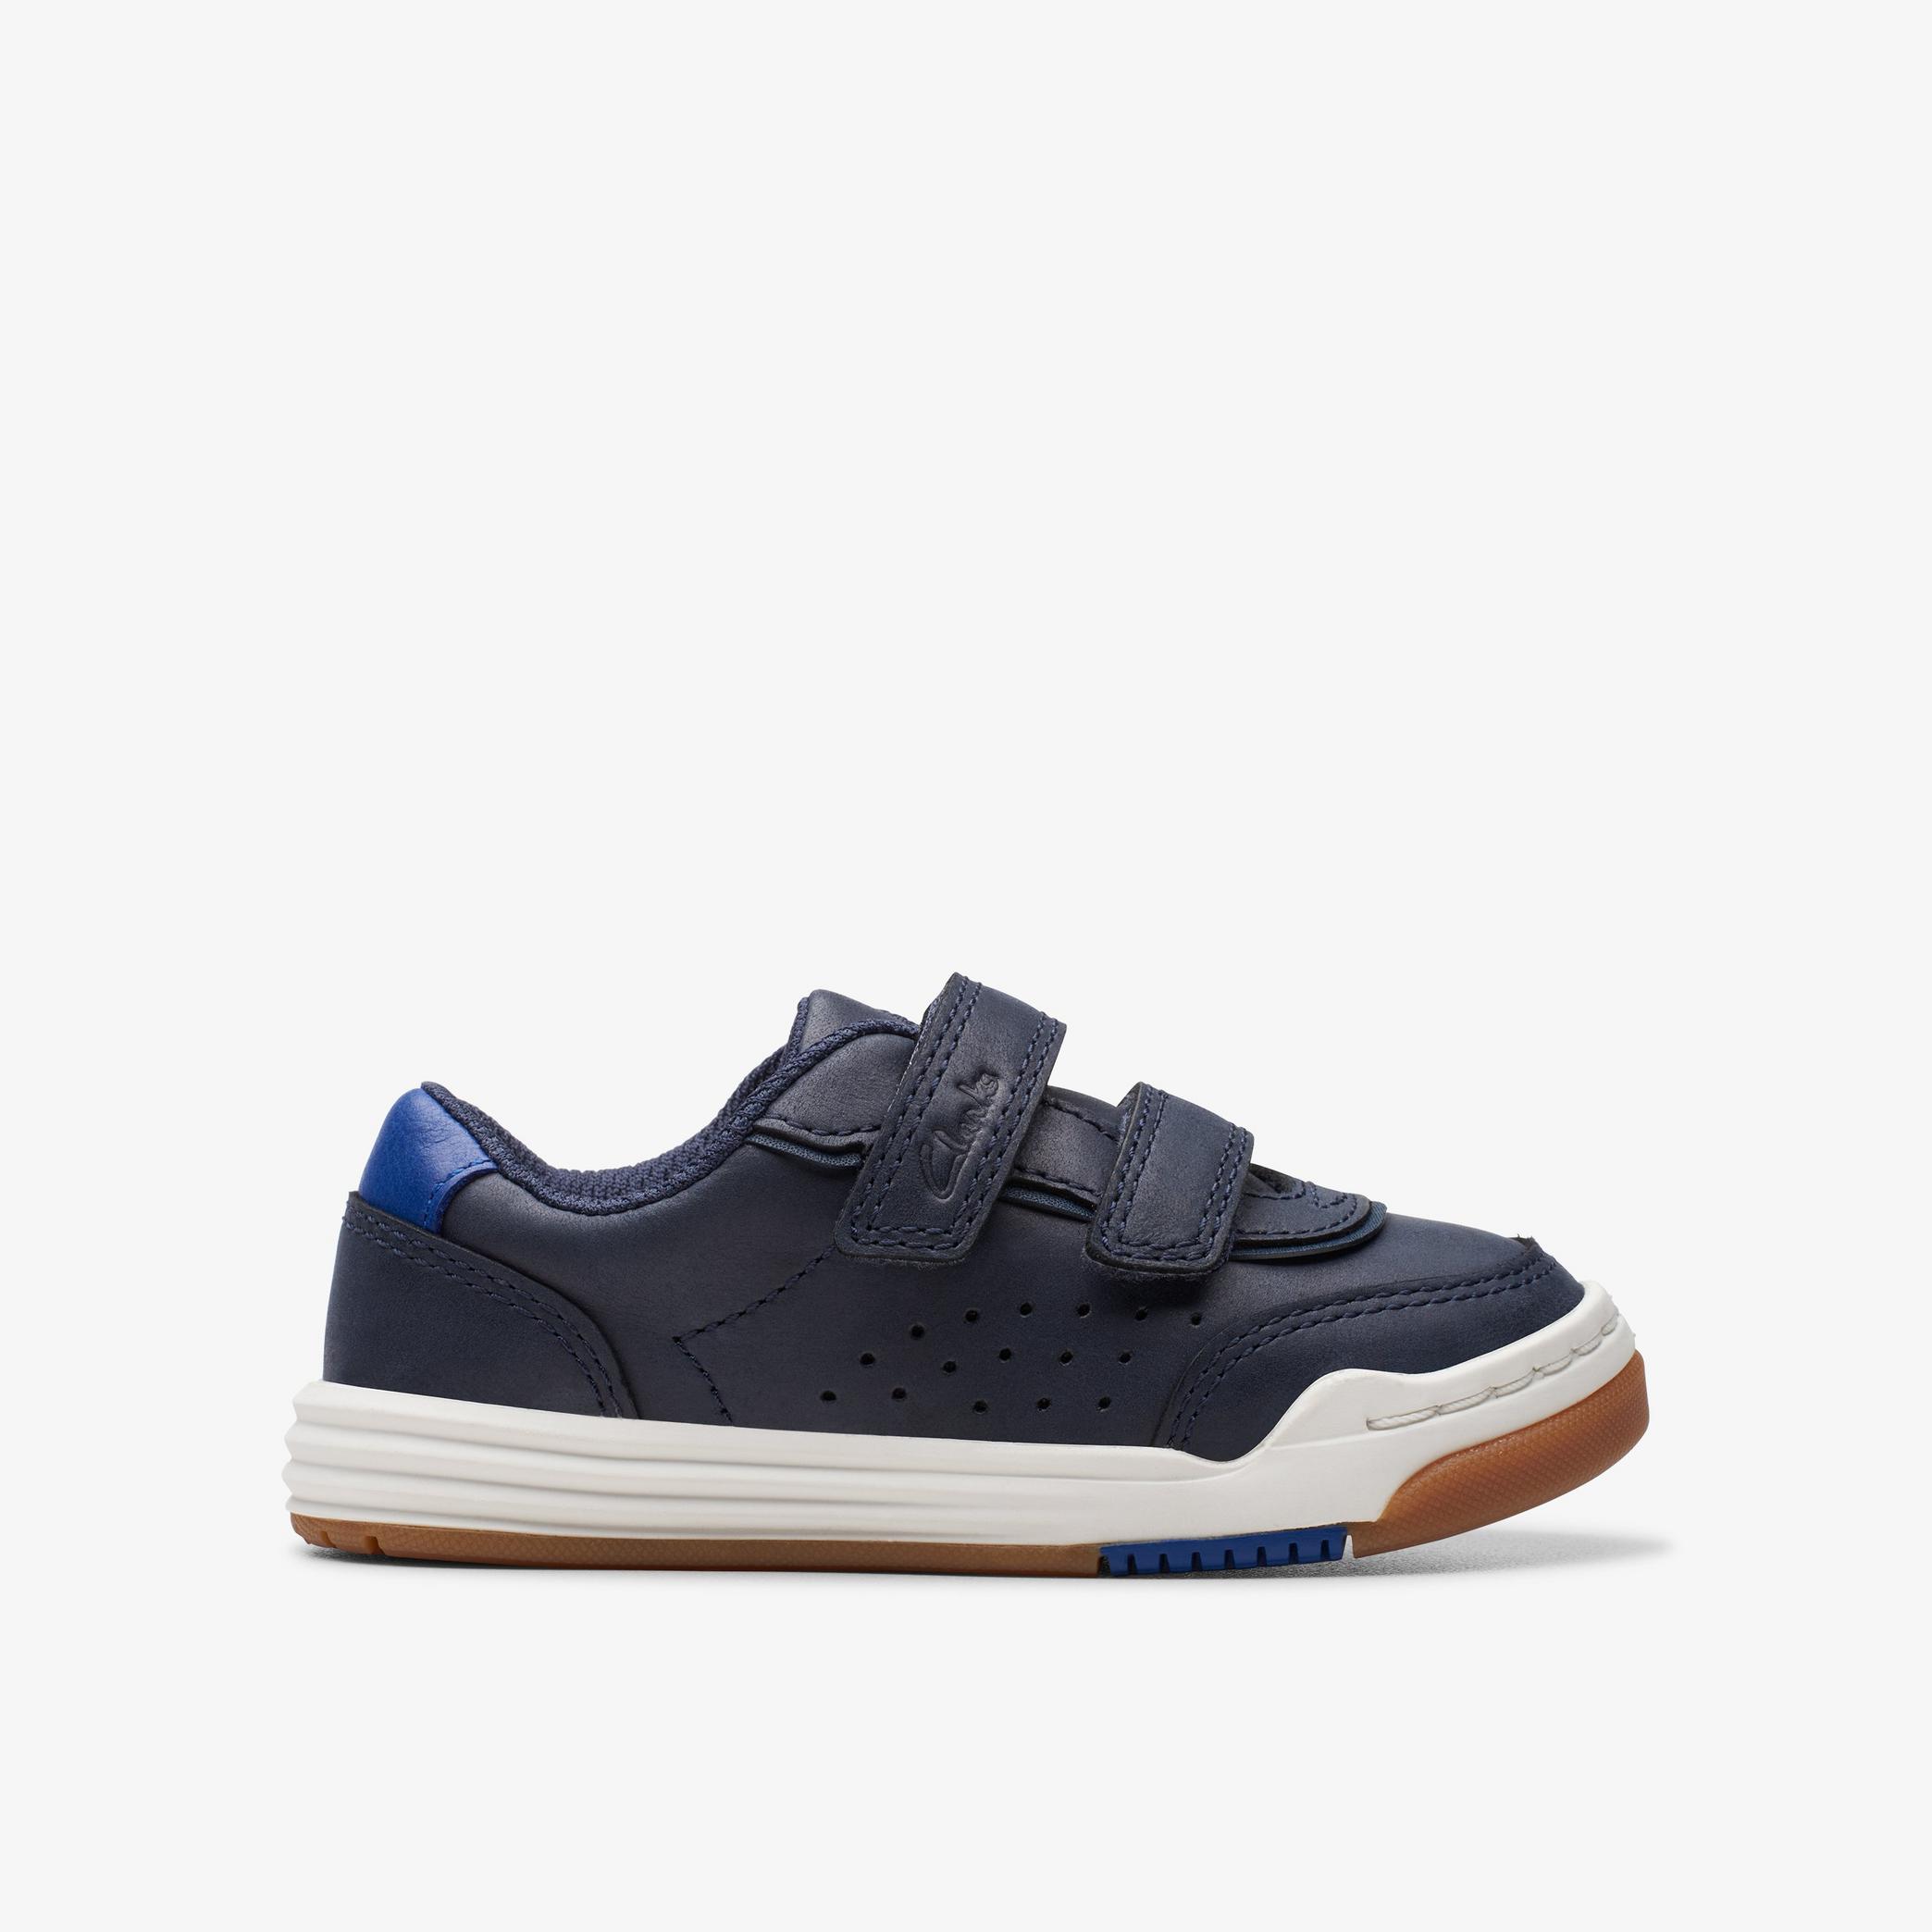 Urban Solo Toddler Navy Trainers, view 1 of 6